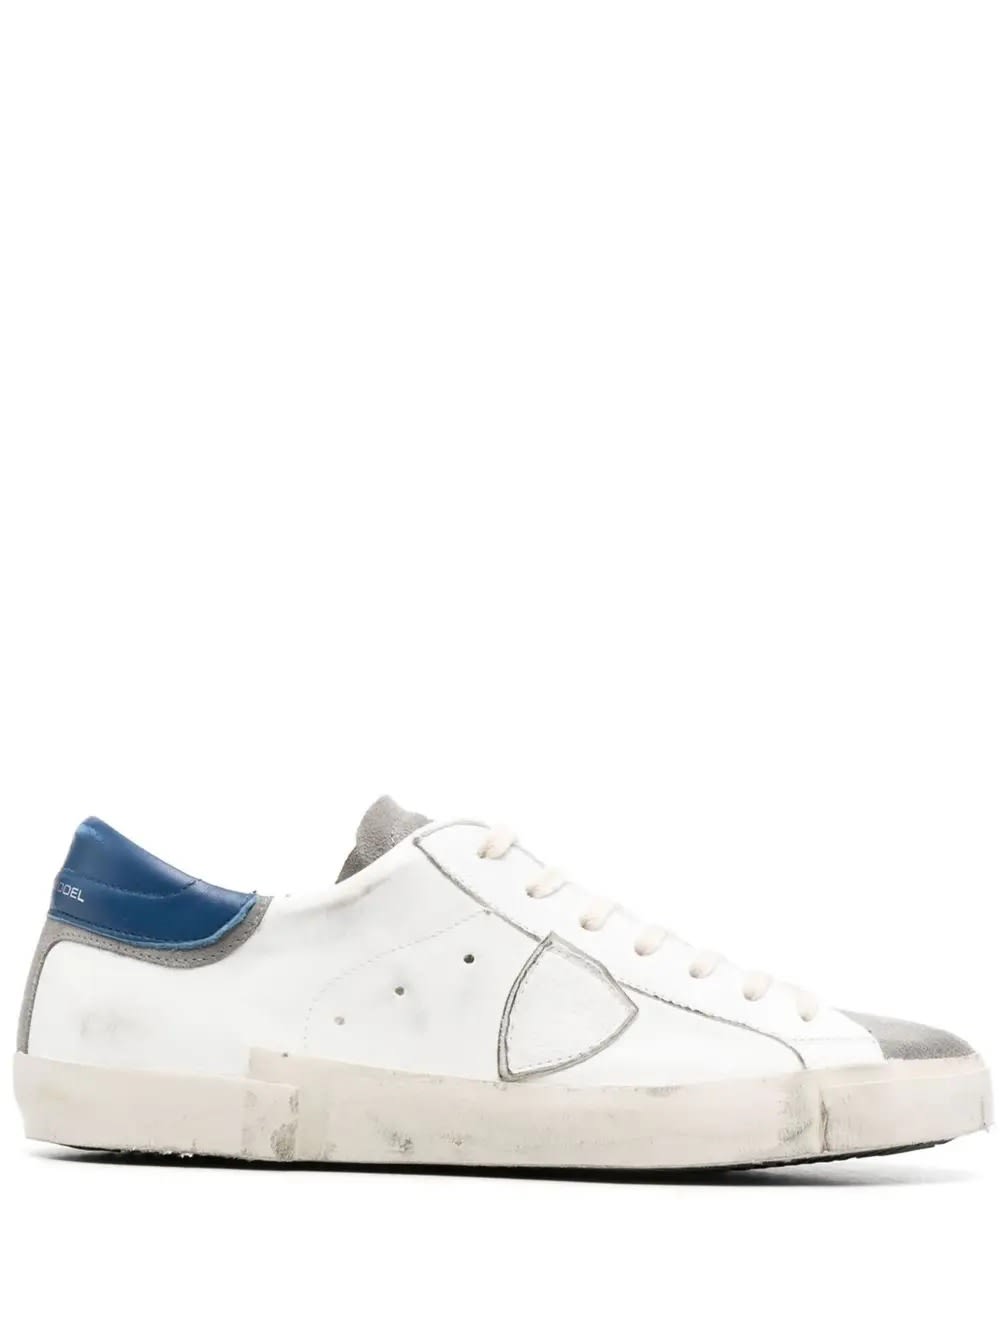 Prsx Low Sneakers - White And Blue